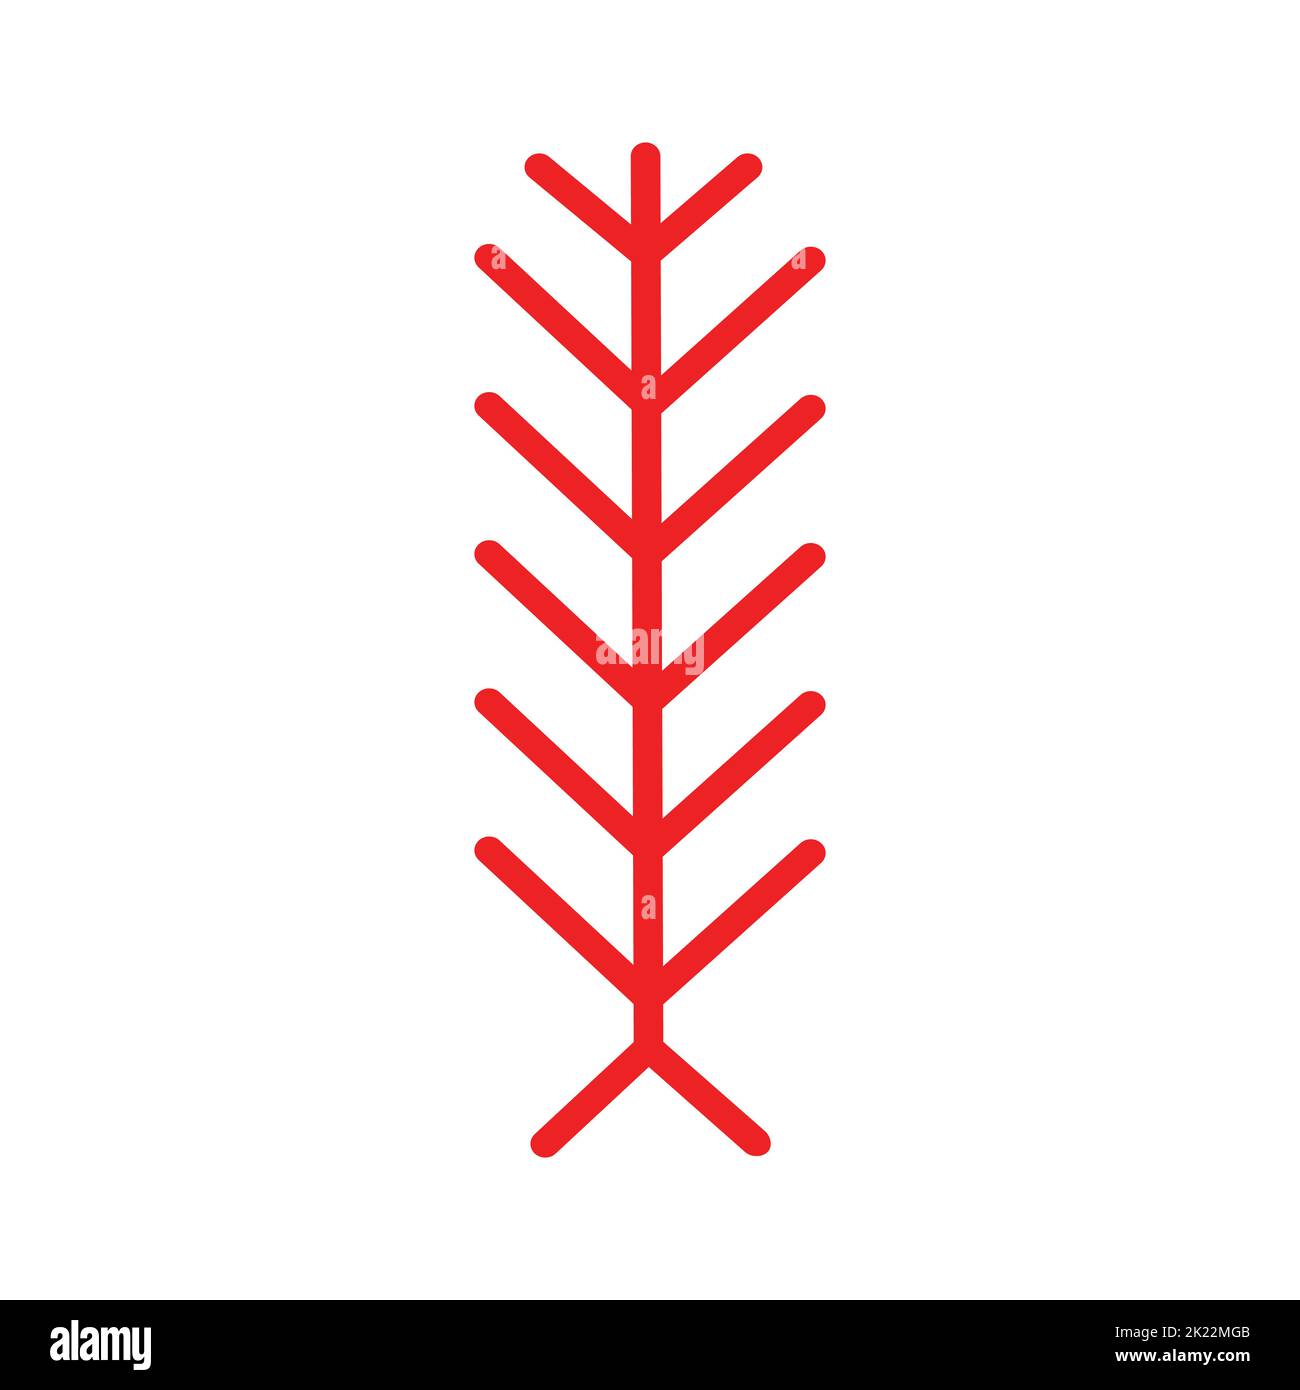 Vector isolated illustration with red geometric symbol of christmas tree or spruce. Simplified fir shape is ornamental element of Karelia and Finnish Stock Vector